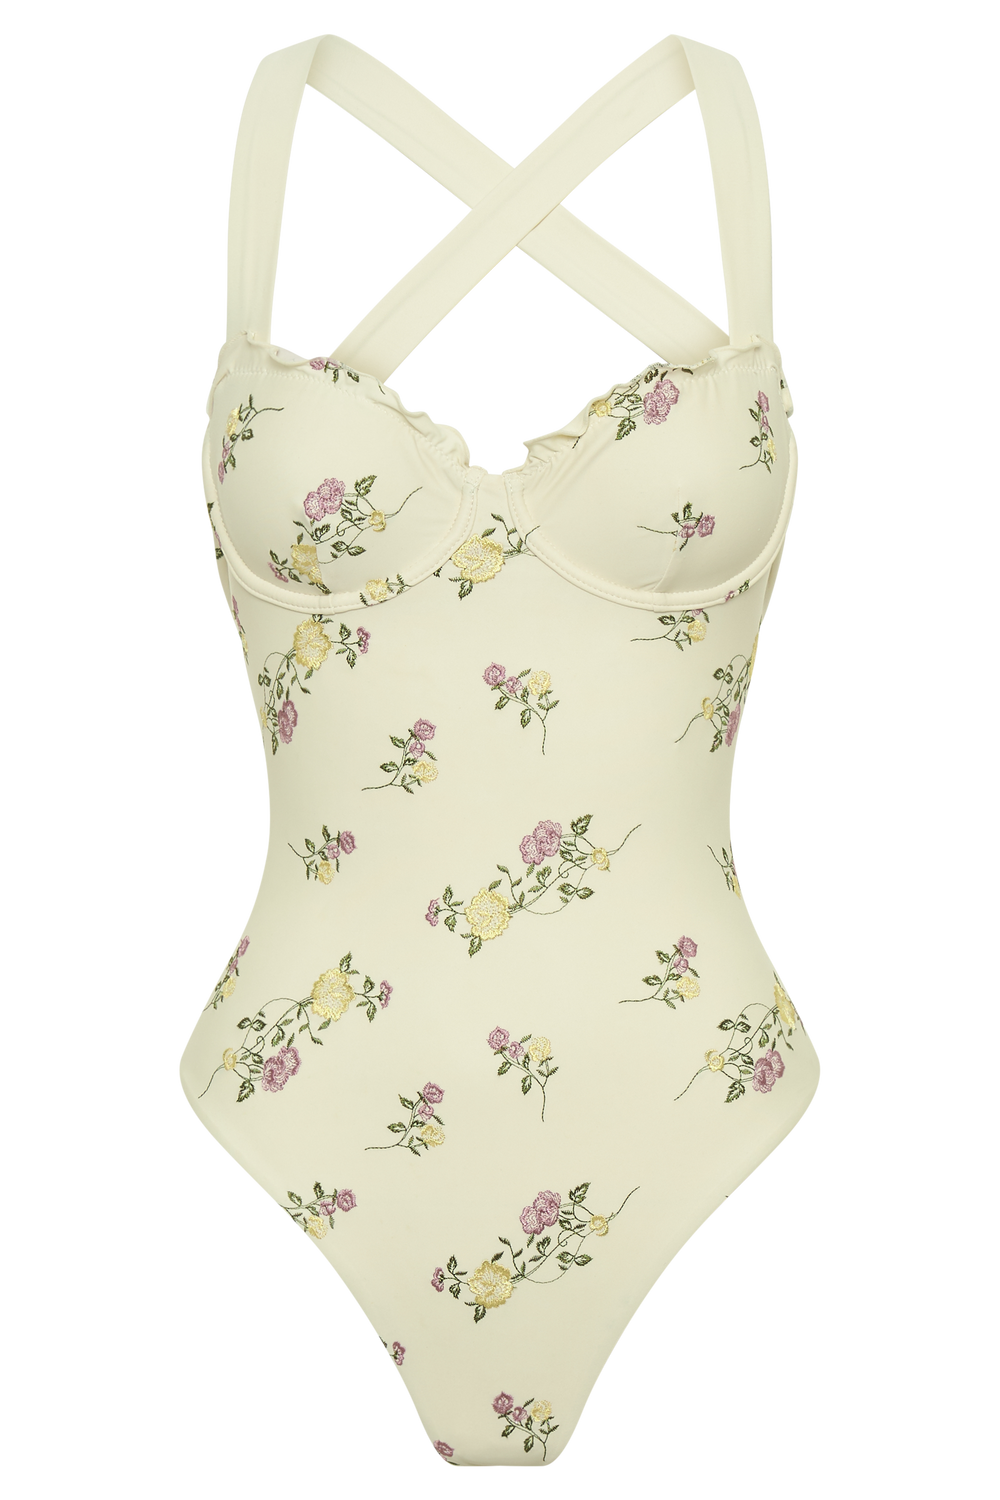 Stephanie Embroidered One Piece Swimsuit - Ivory Flower Print